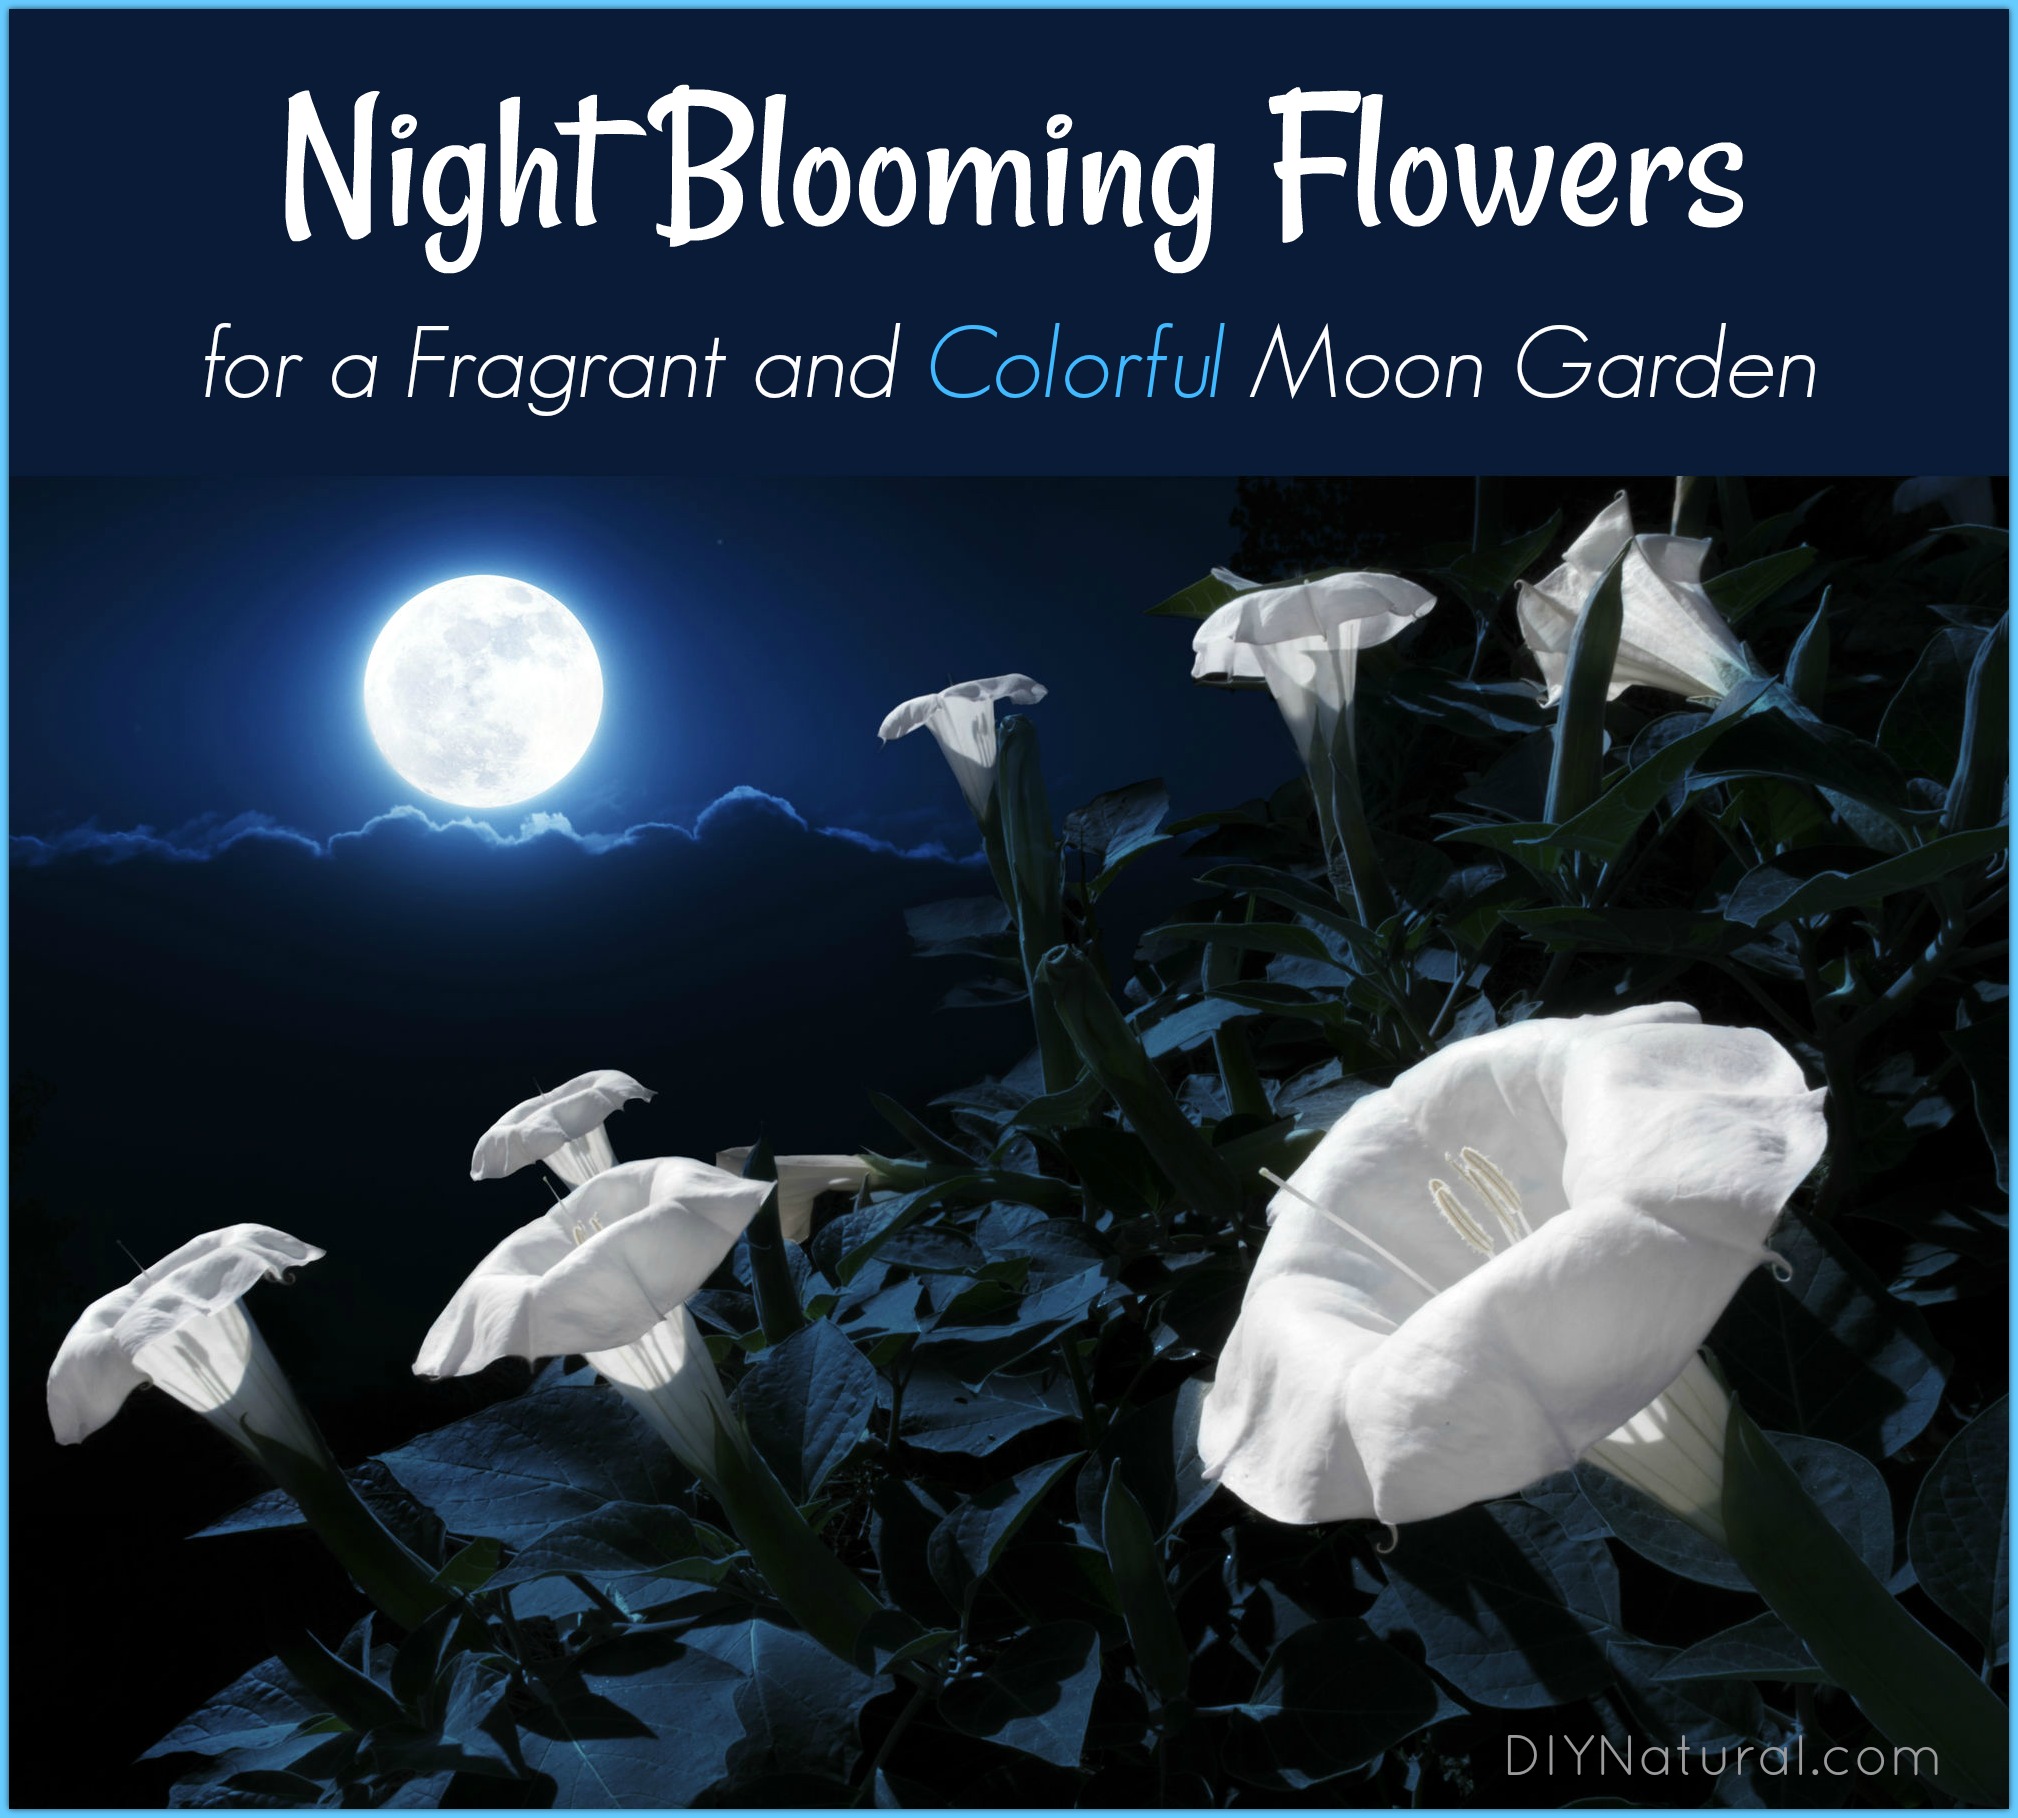 Night Blooming Flowers – Fragrant Flowers that Perfume your Garden!